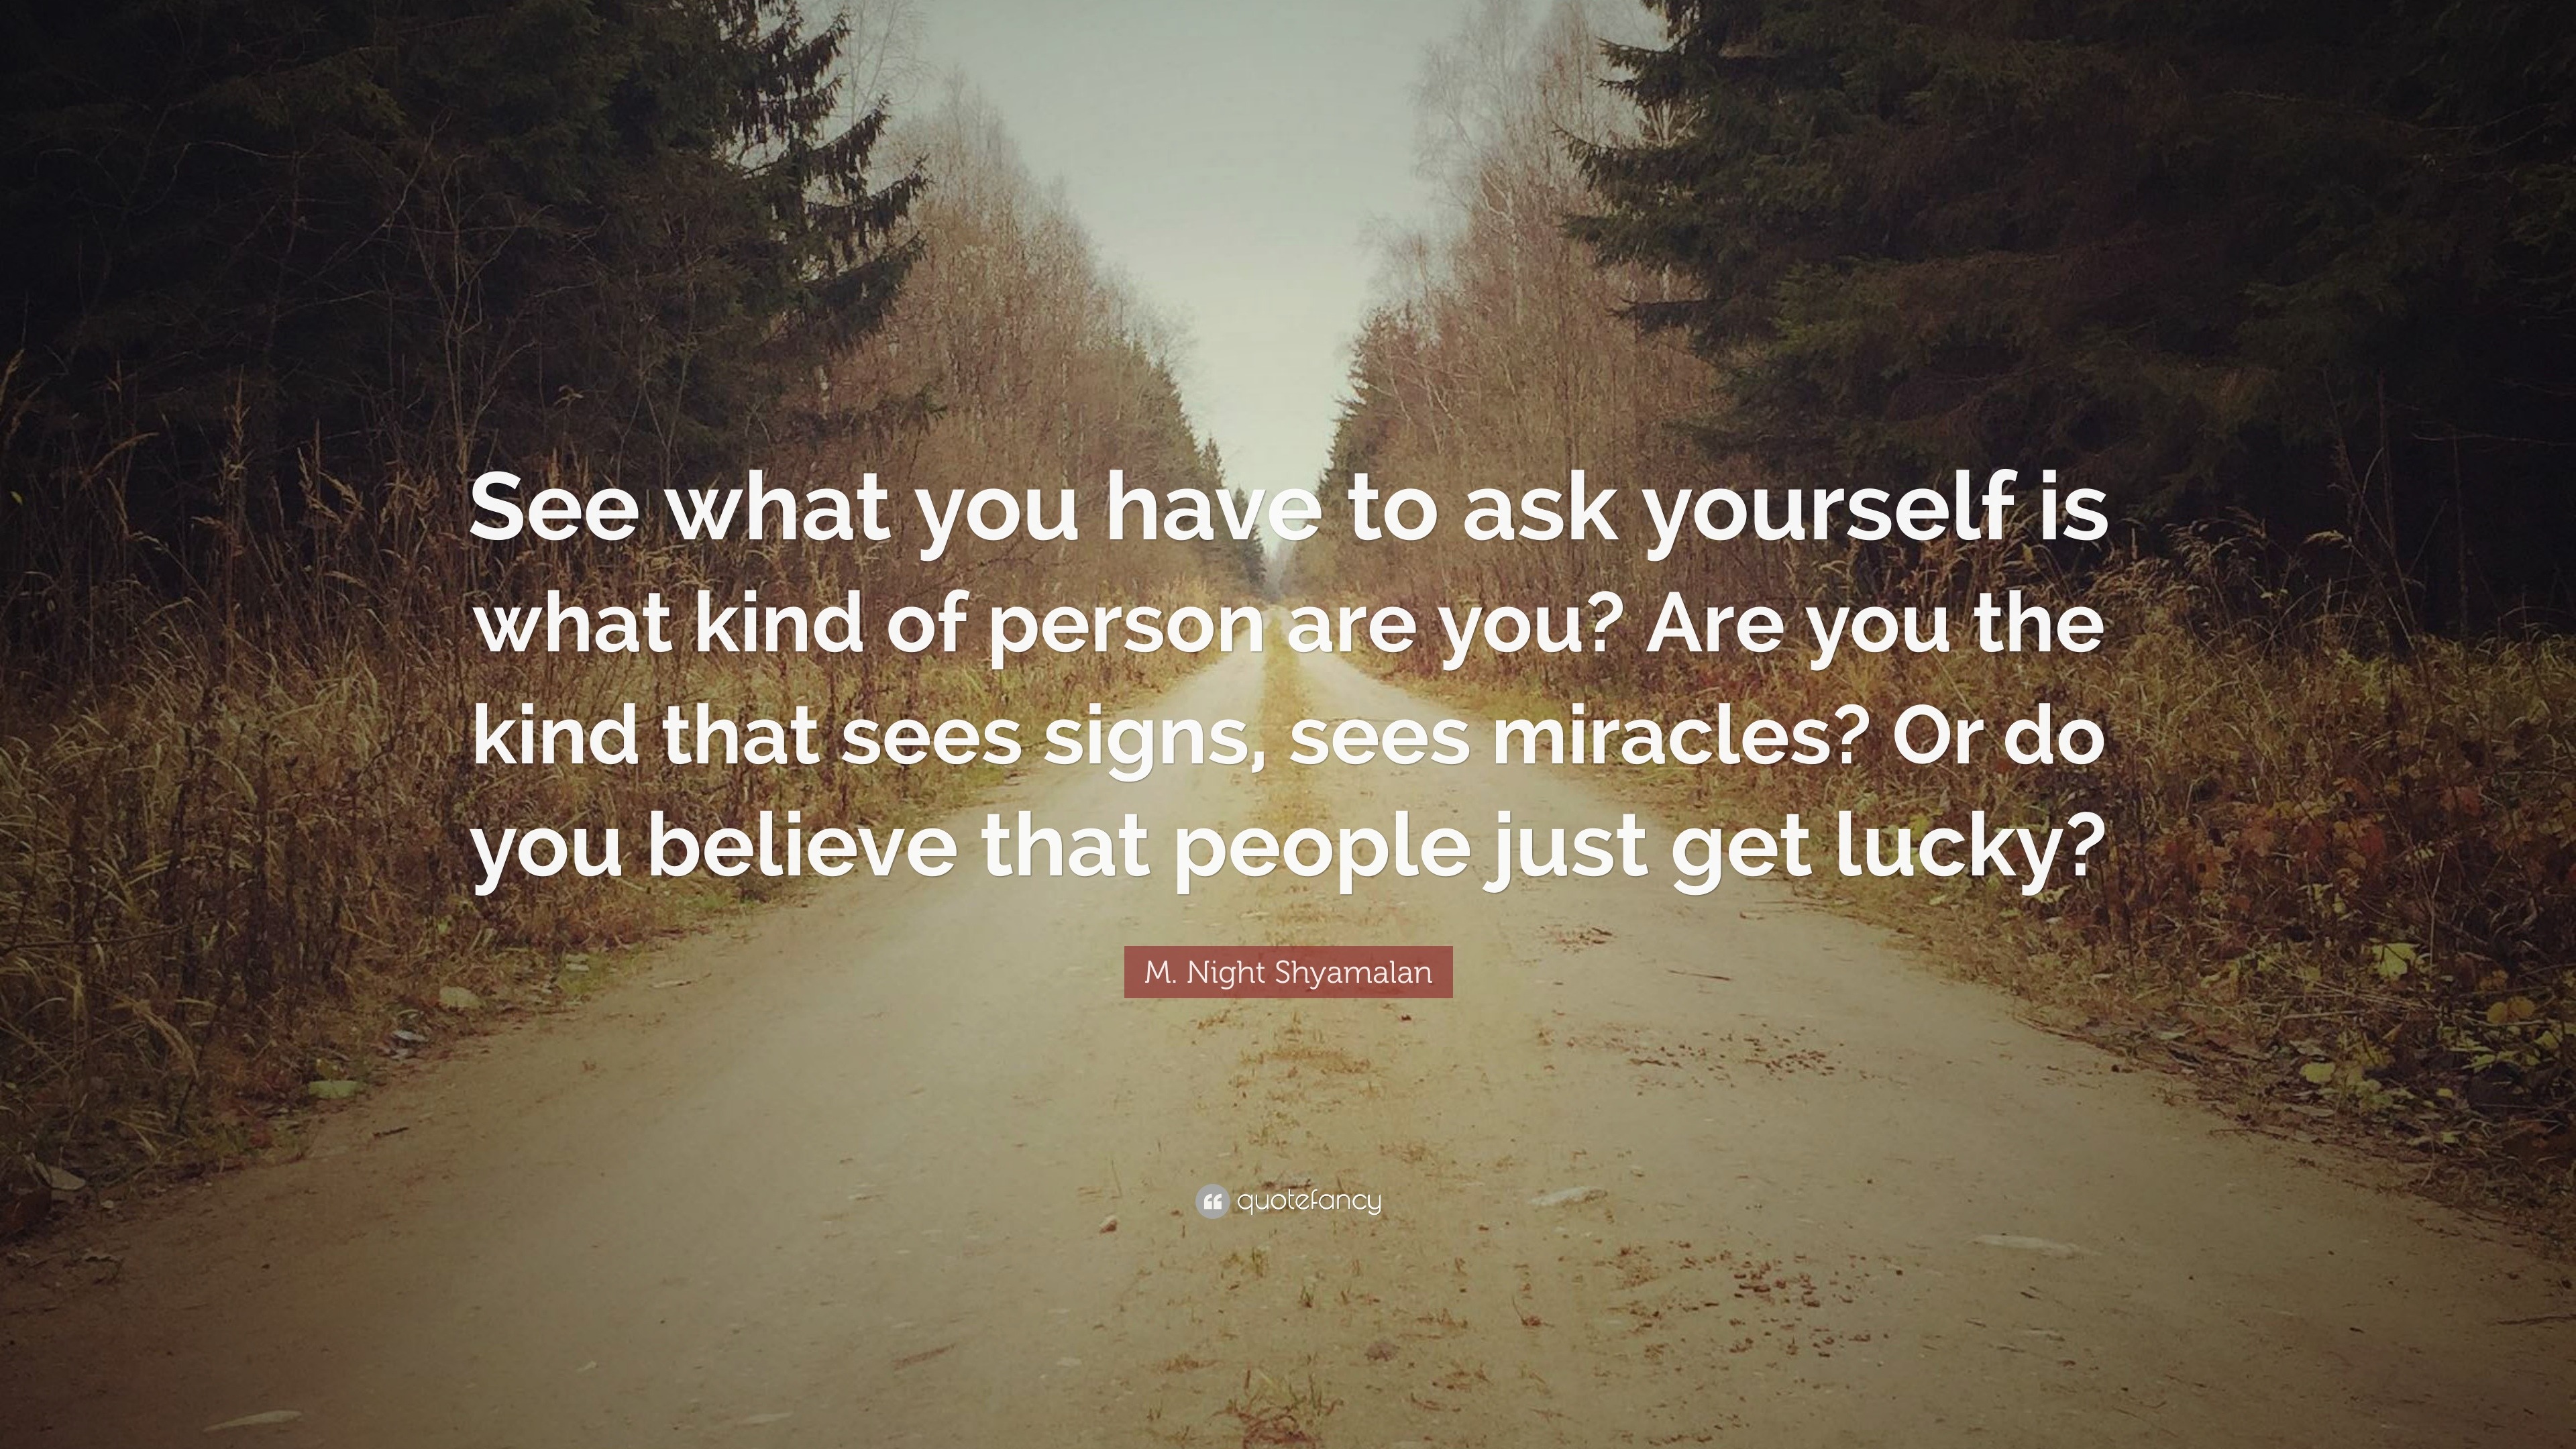 M. Night Shyamalan Quote: “See what you have to ask yourself is what ...